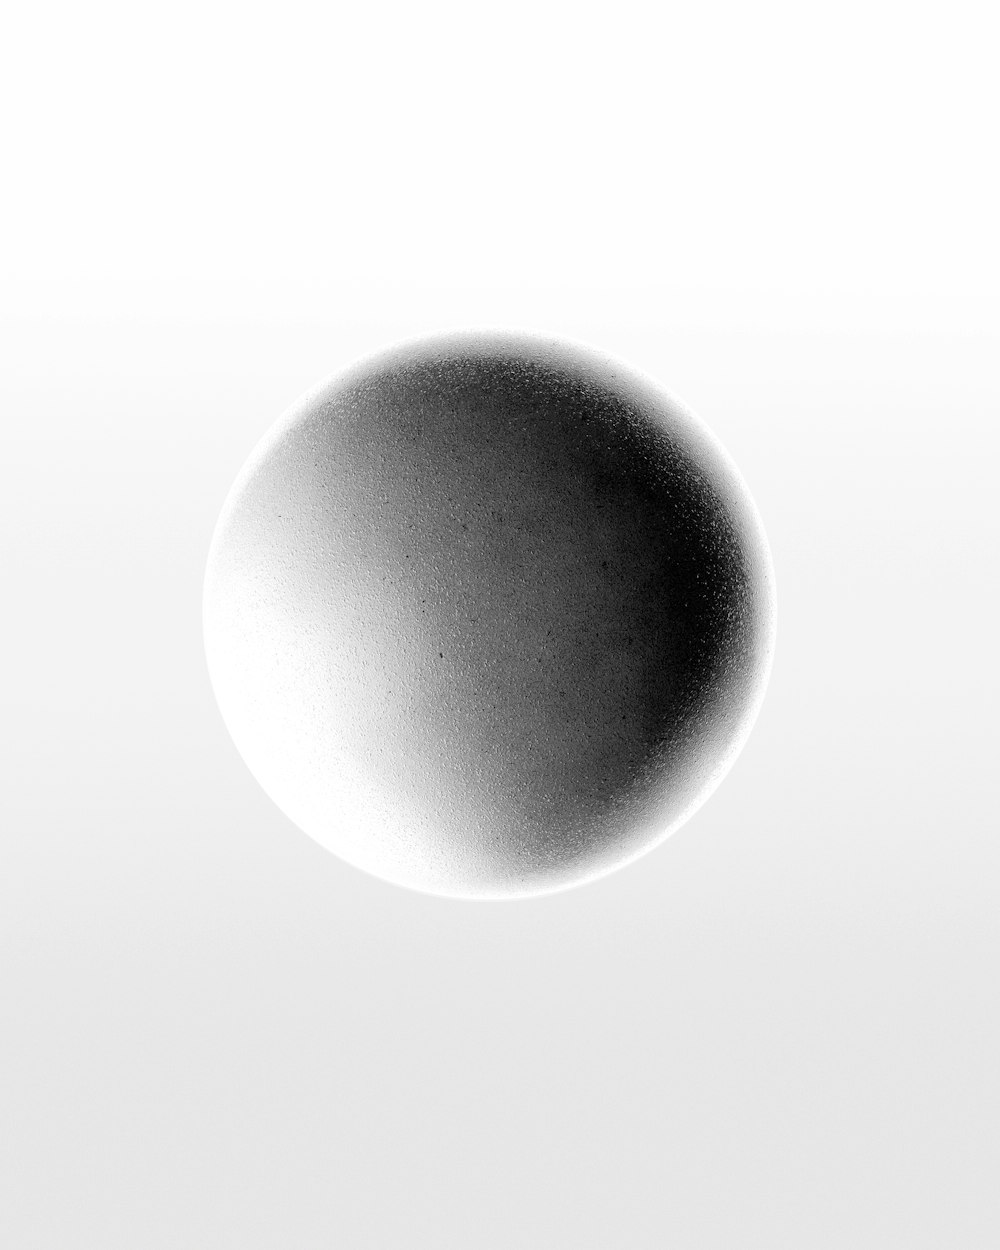 a circular object with a white background